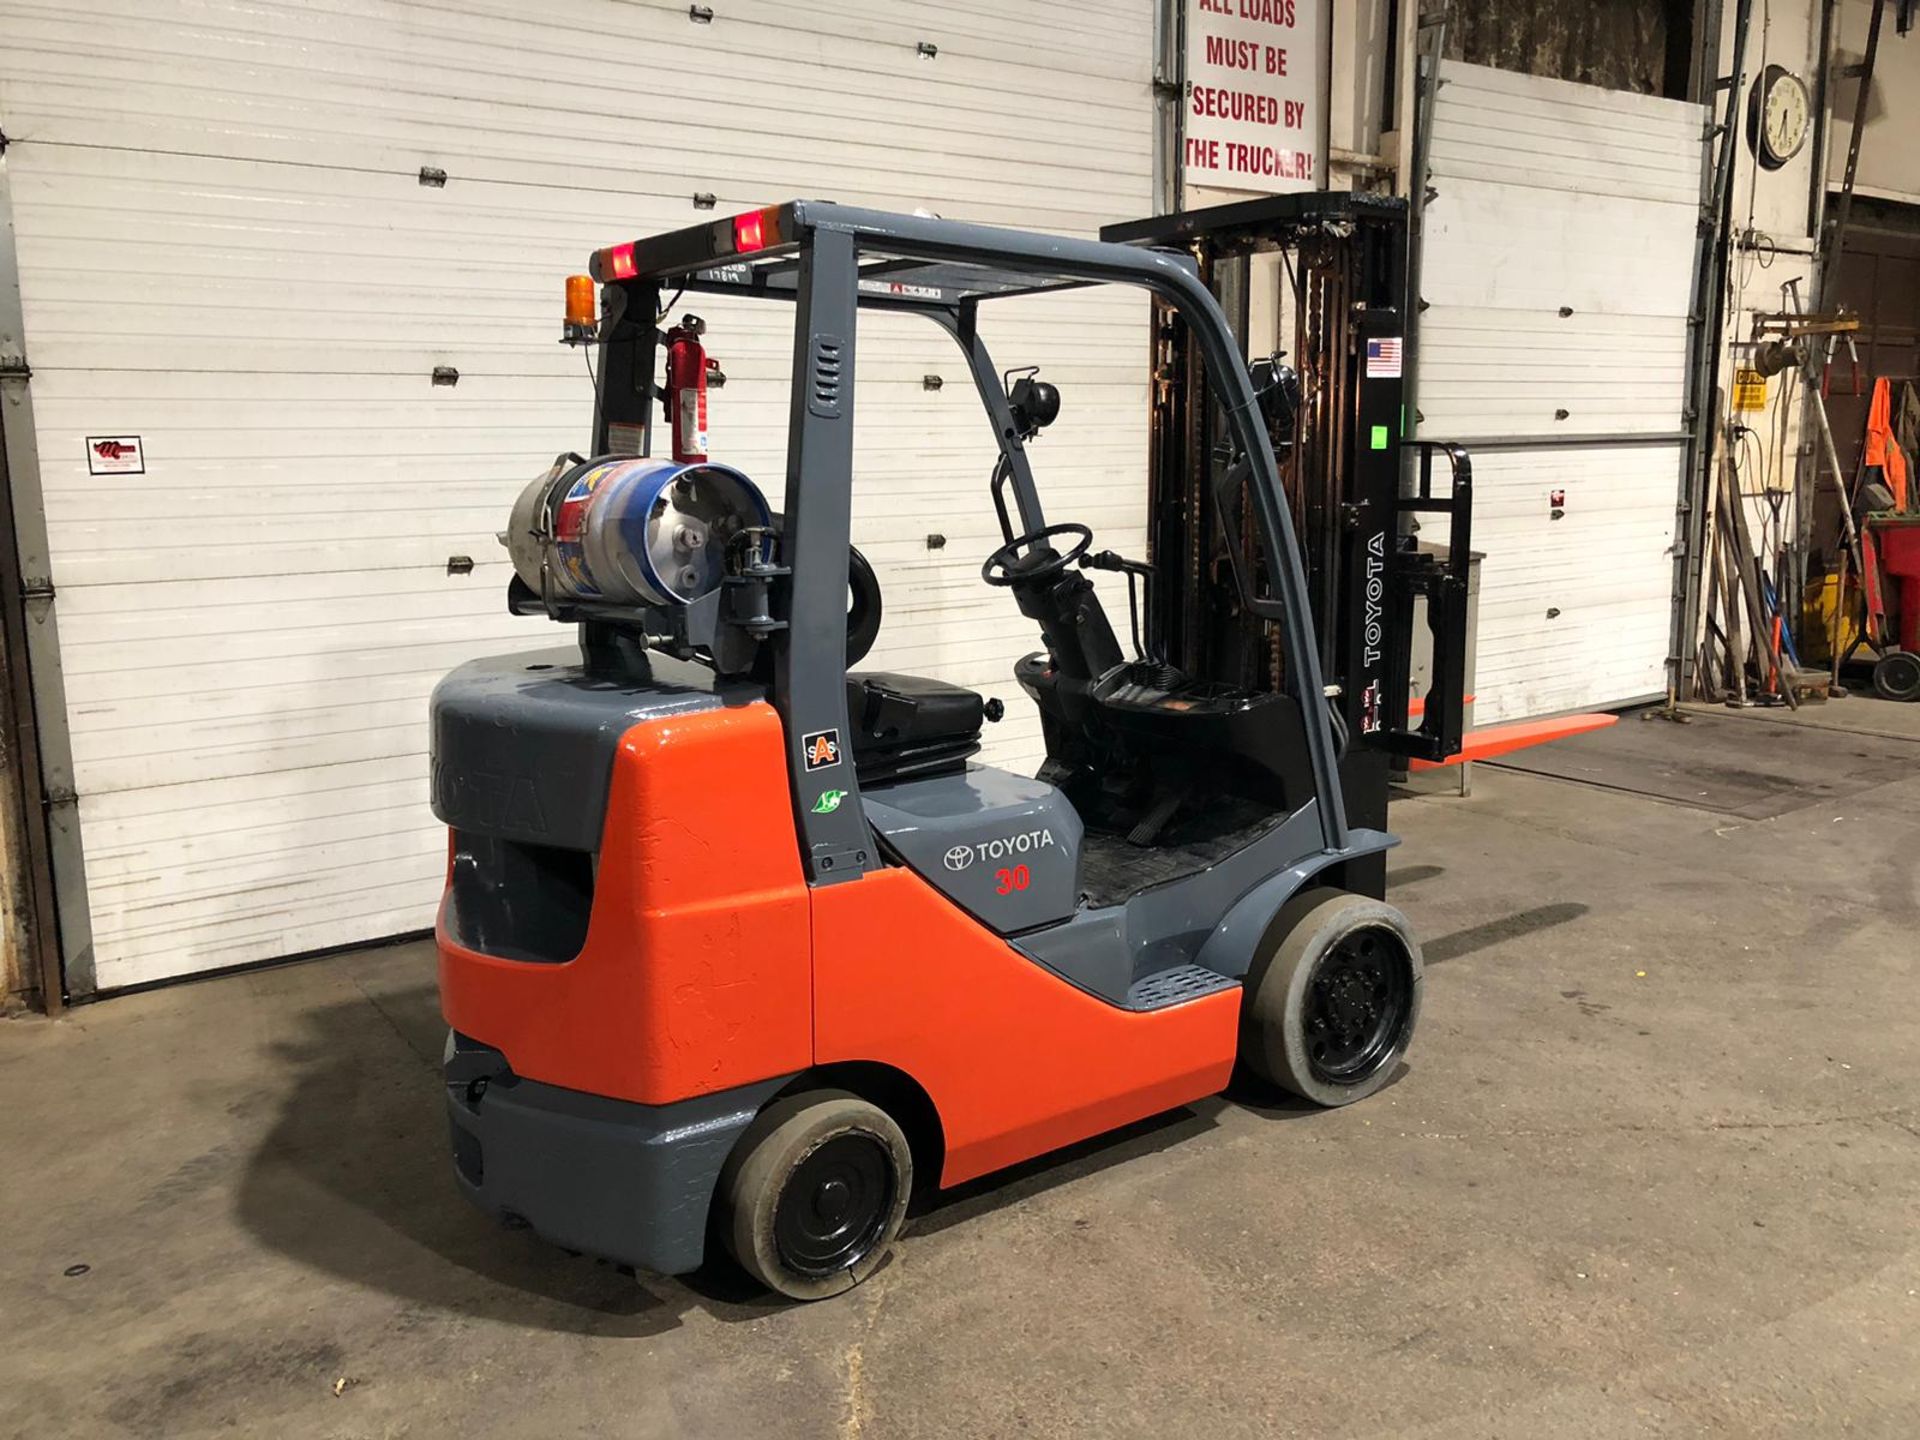 2012 Toyota 6,000lbs Capacity LPG (Propane) Forklift with sideshift and 3-STAGE MAST - Image 3 of 5